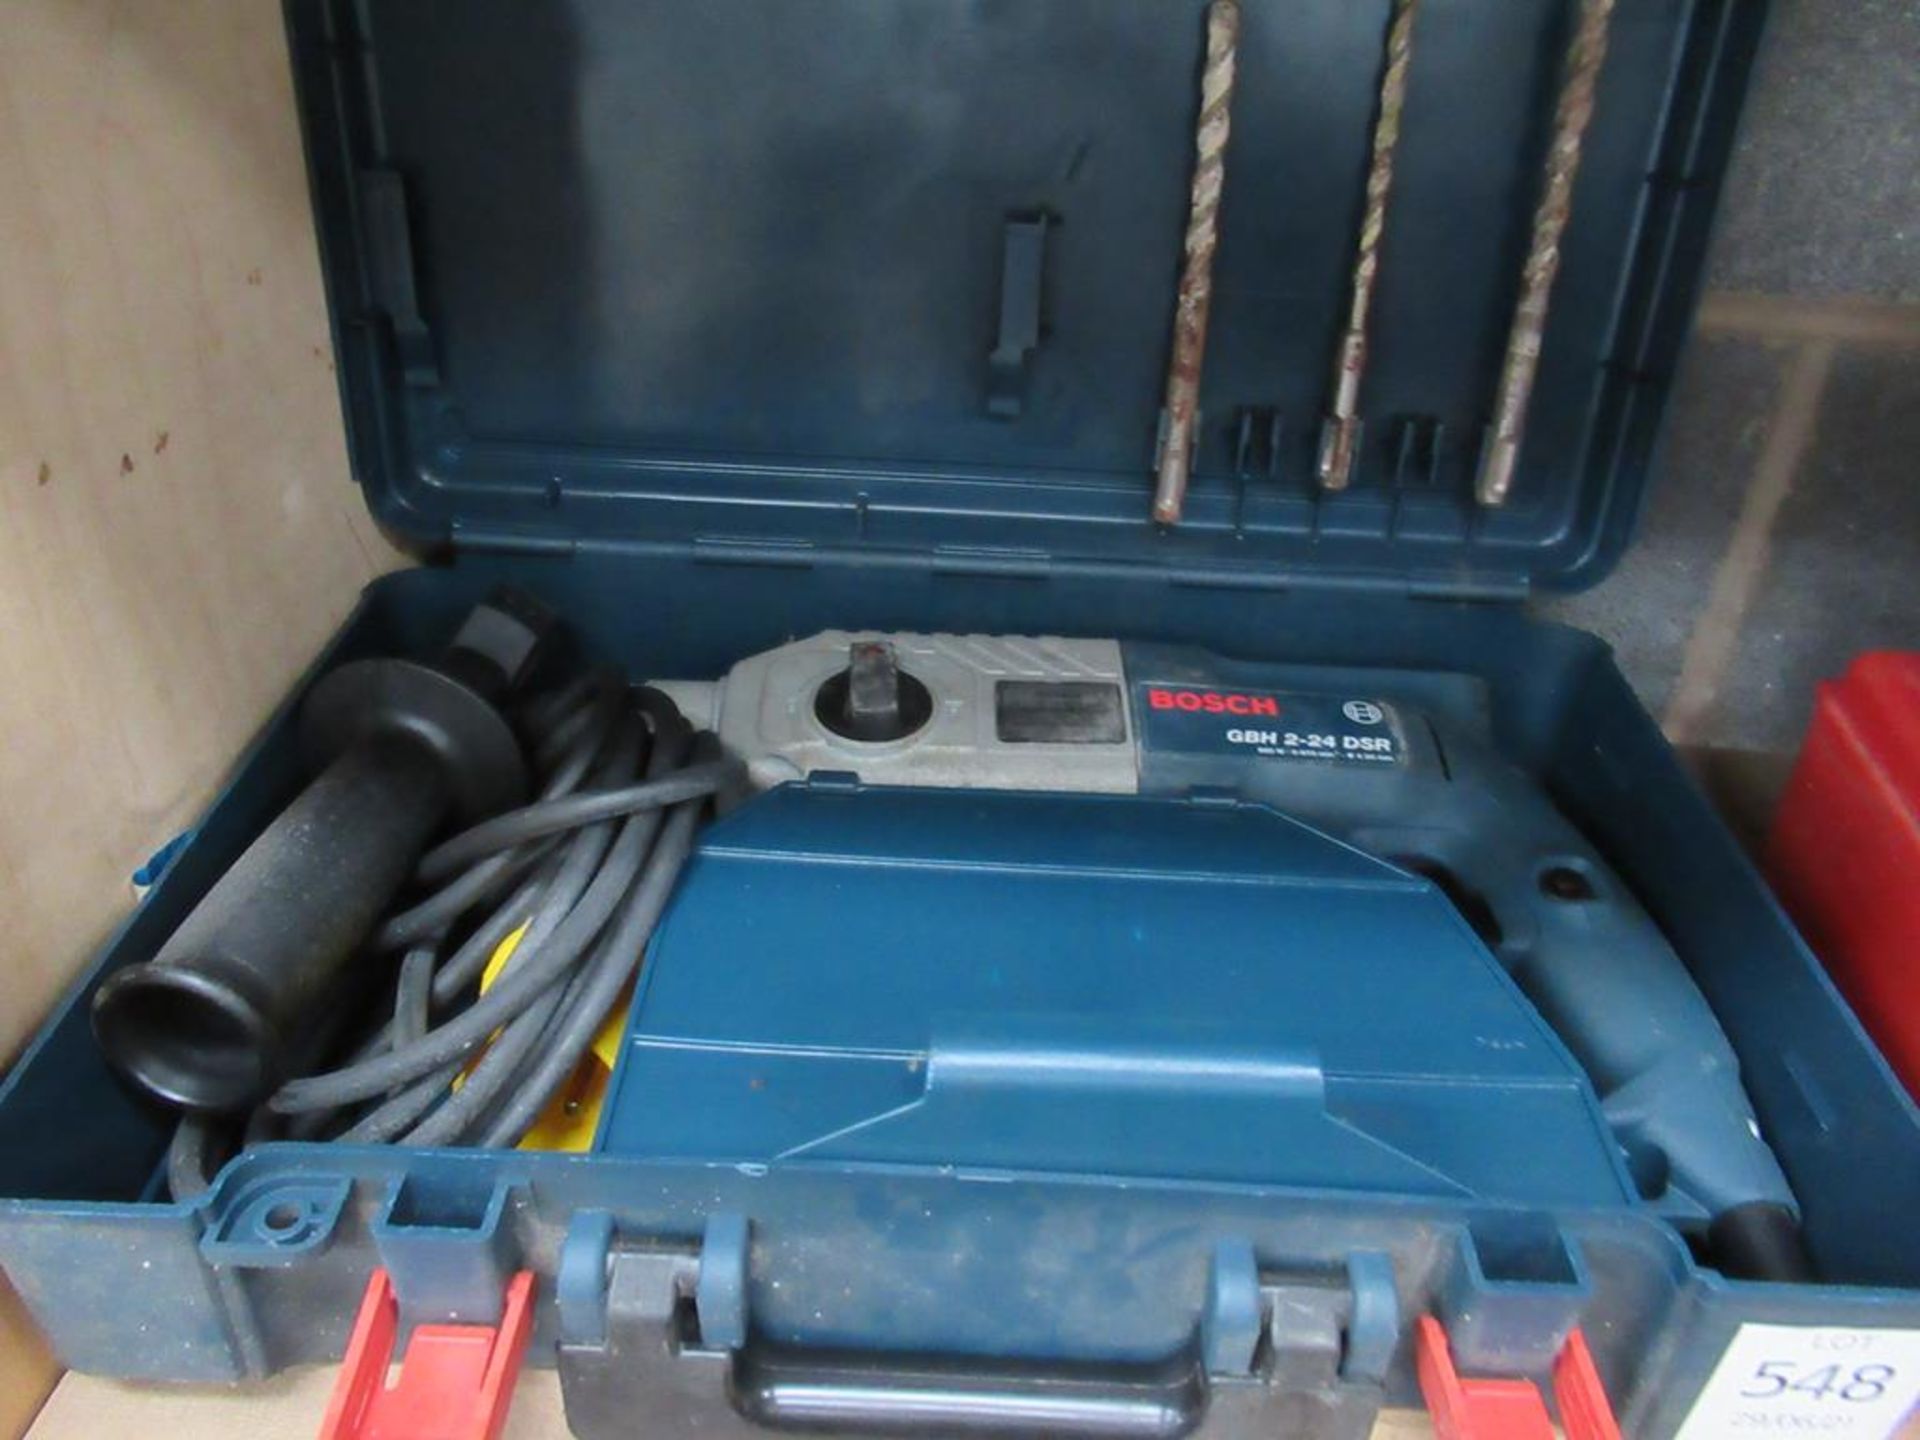 Bosch 110V GSB 16RE & GBH 2-24 DSR Impact hammer drills - untested - Image 4 of 4